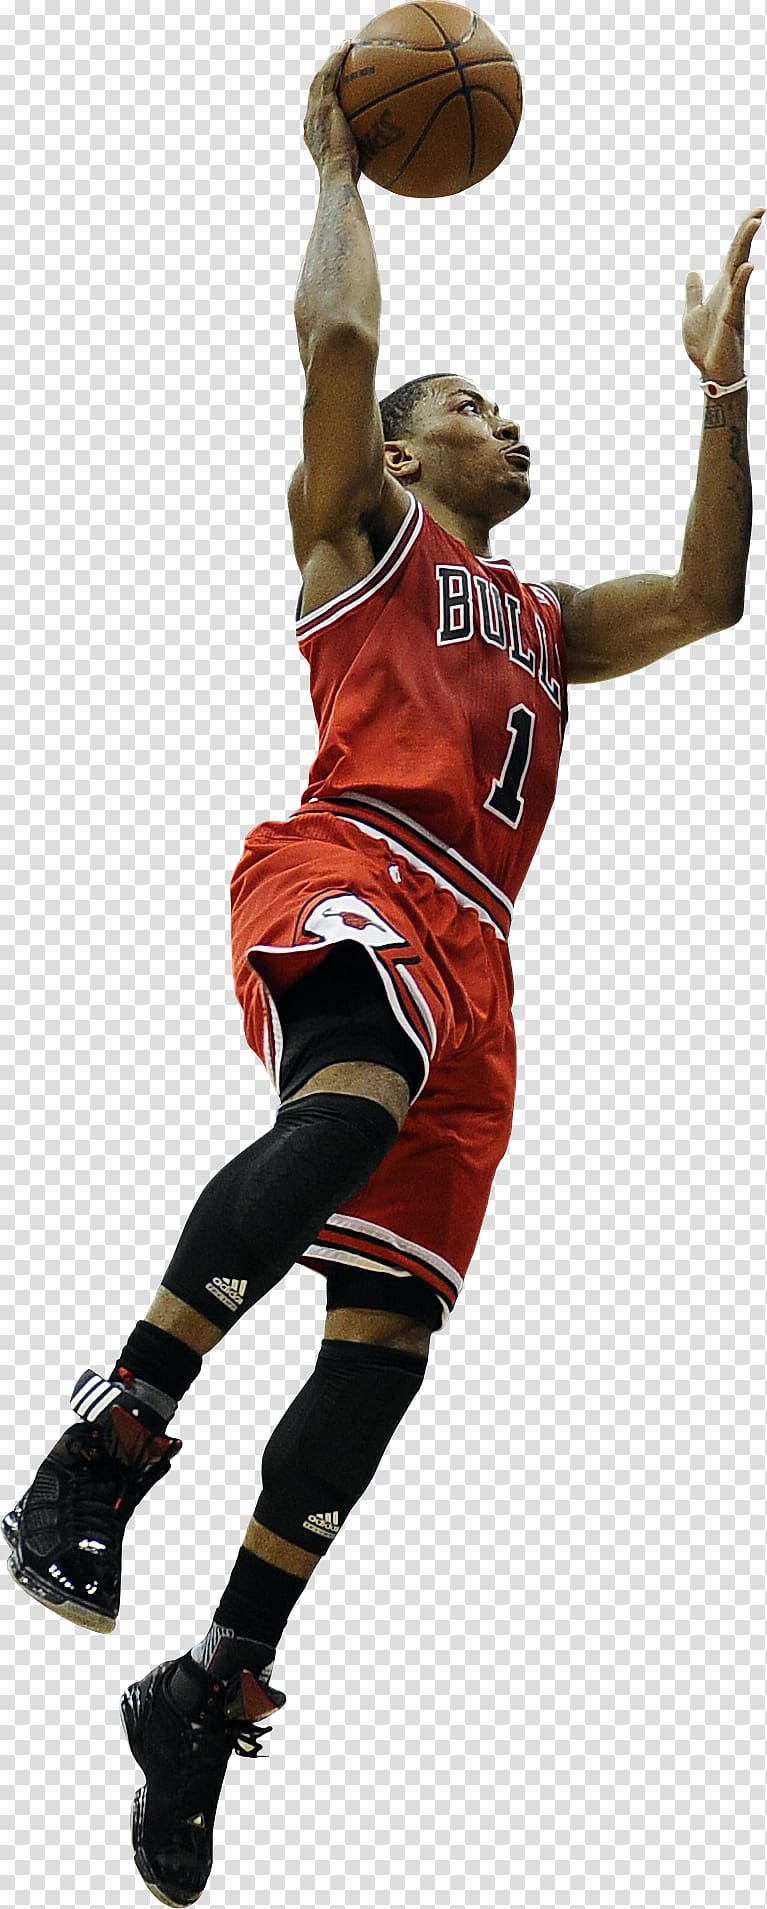 Insomnia Pat Williams Sleep Chicago Bulls, psd transparent background PNG clipart